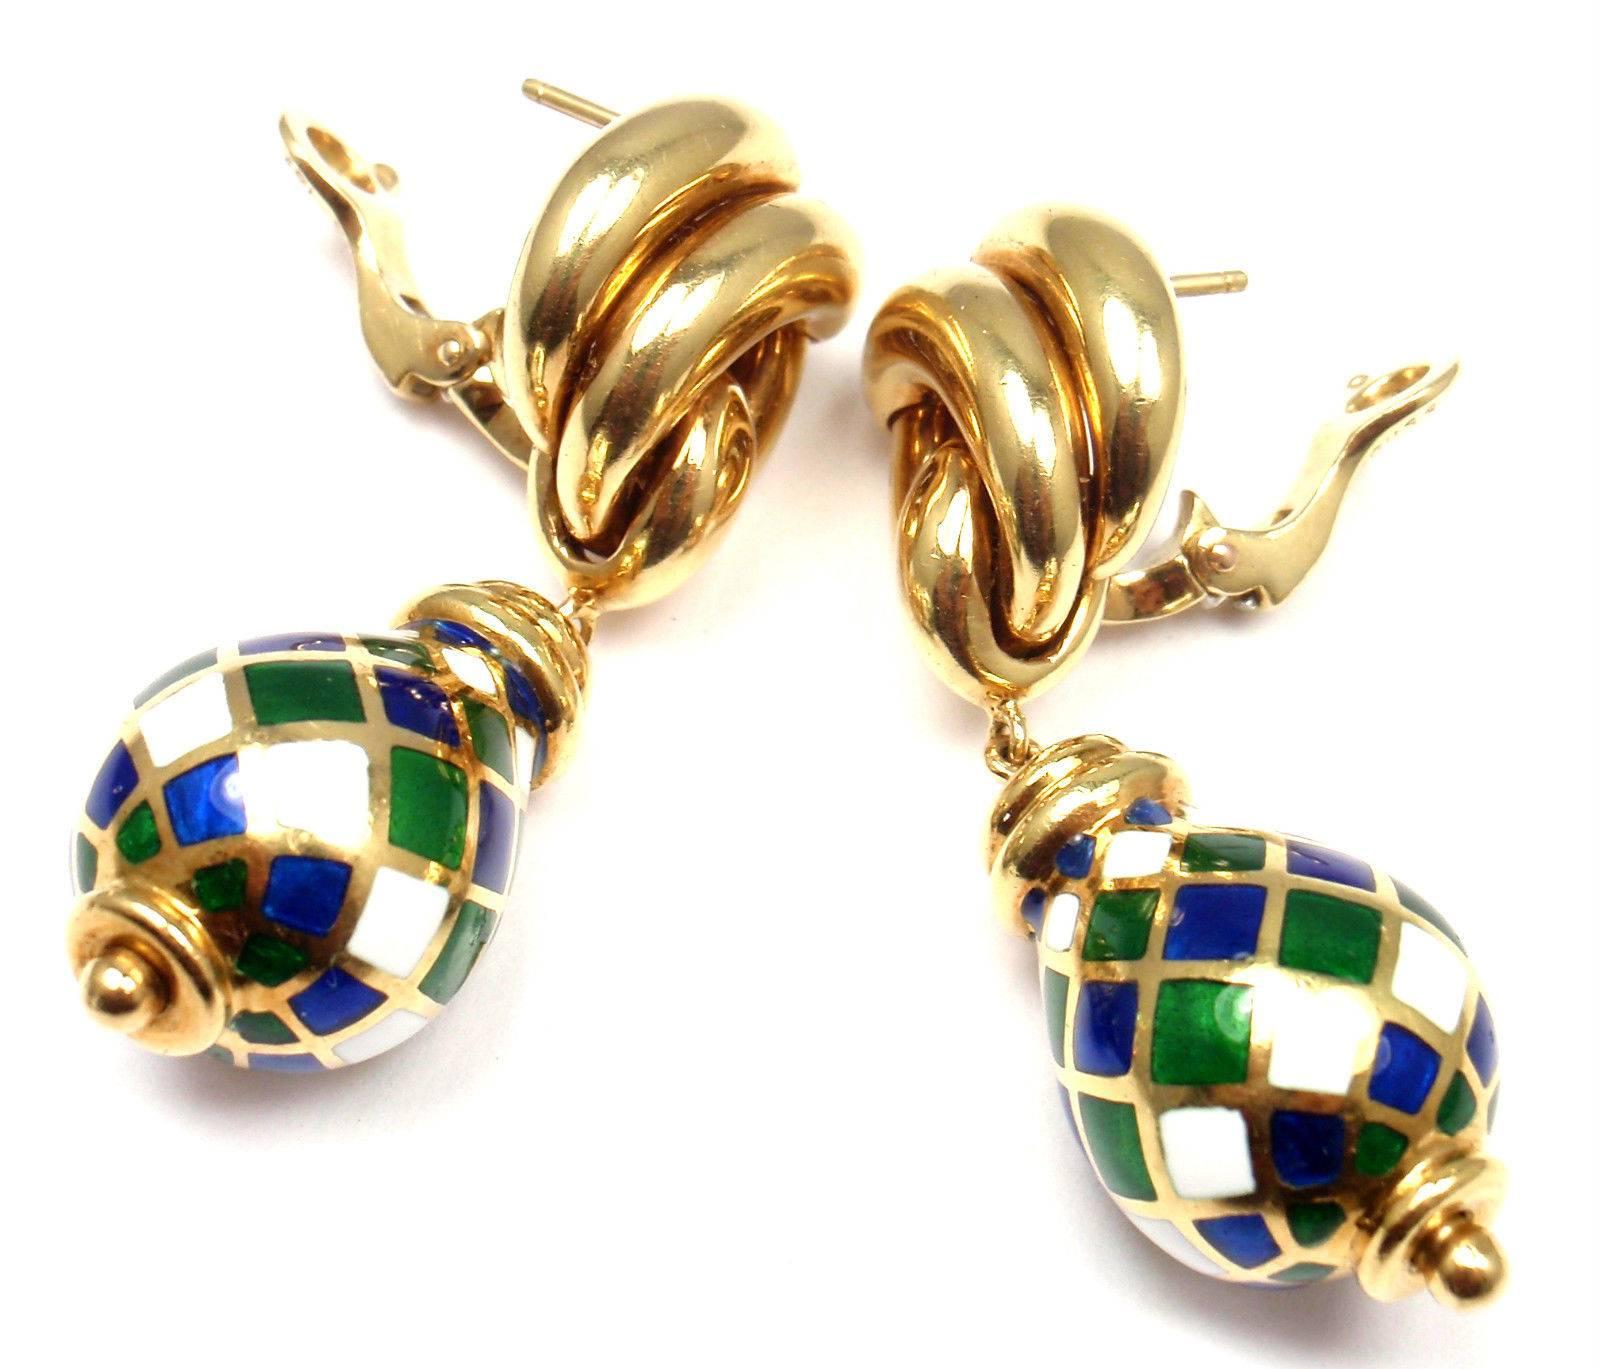 18k Yellow Gold Vintage Harlequin Enamel Drop Earrings by Mauboussin. 
****These earrings are for pierced ears.
Details:
Measurements: 44mm x 16mm
Weight: 38.5 grams
Stamped Hallmarks: Mauboussin Paris 18k French Hallmarks
*Free Shipping within the